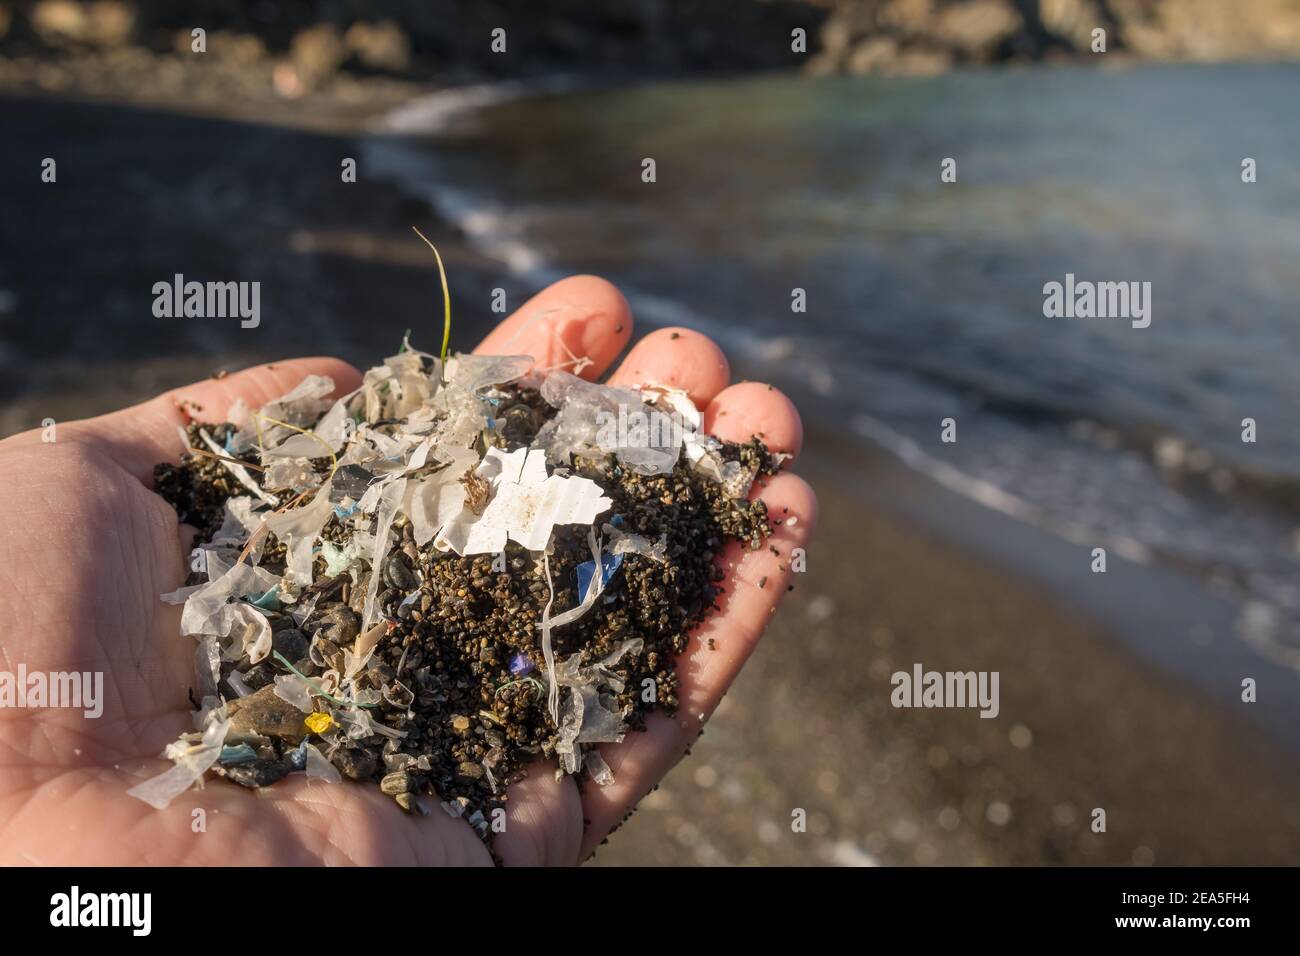 Small plastic parts and microplastics on the sand beach Stock Photo